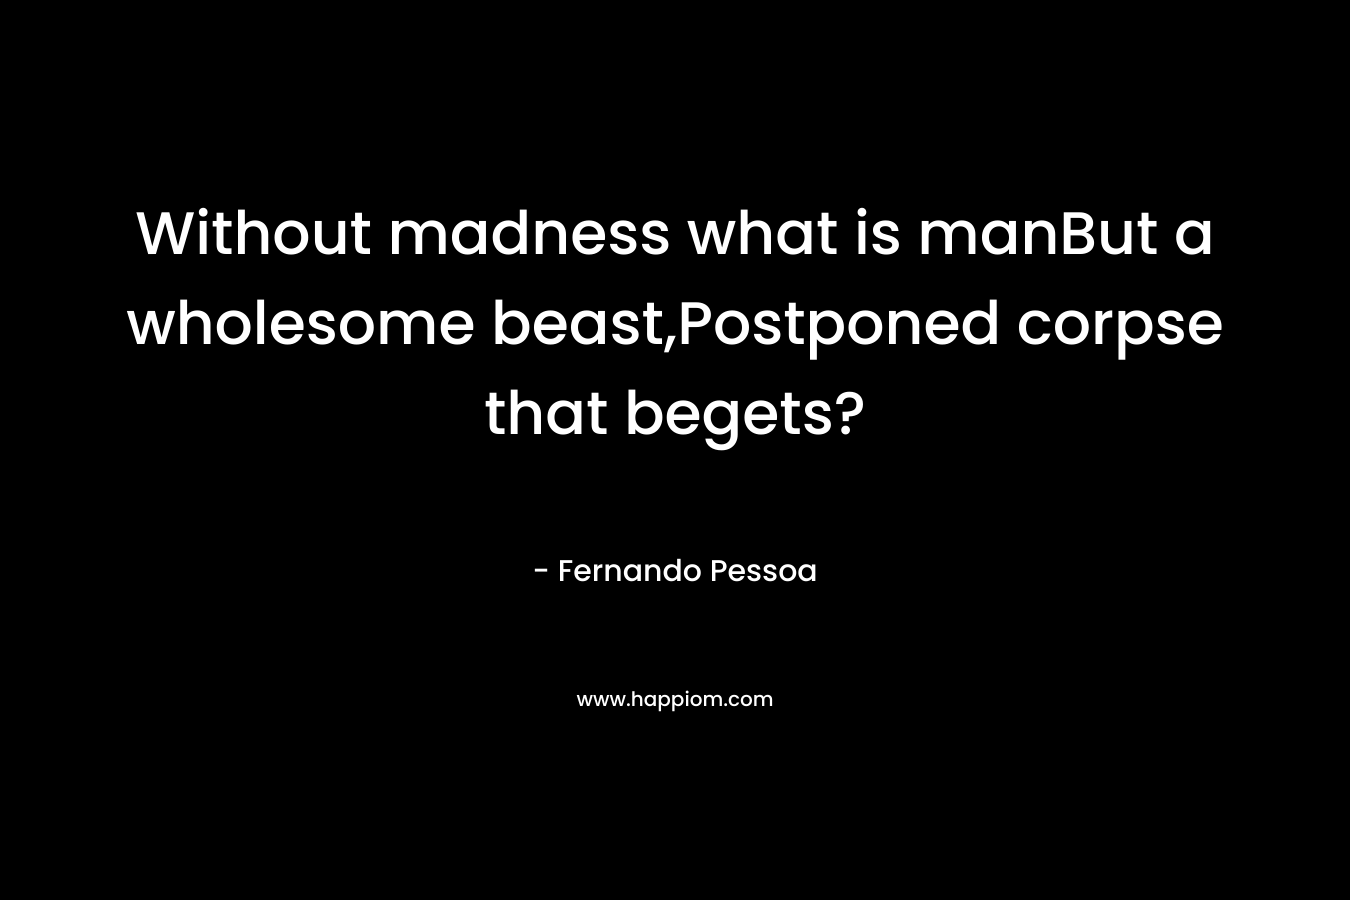 Without madness what is manBut a wholesome beast,Postponed corpse that begets? – Fernando Pessoa